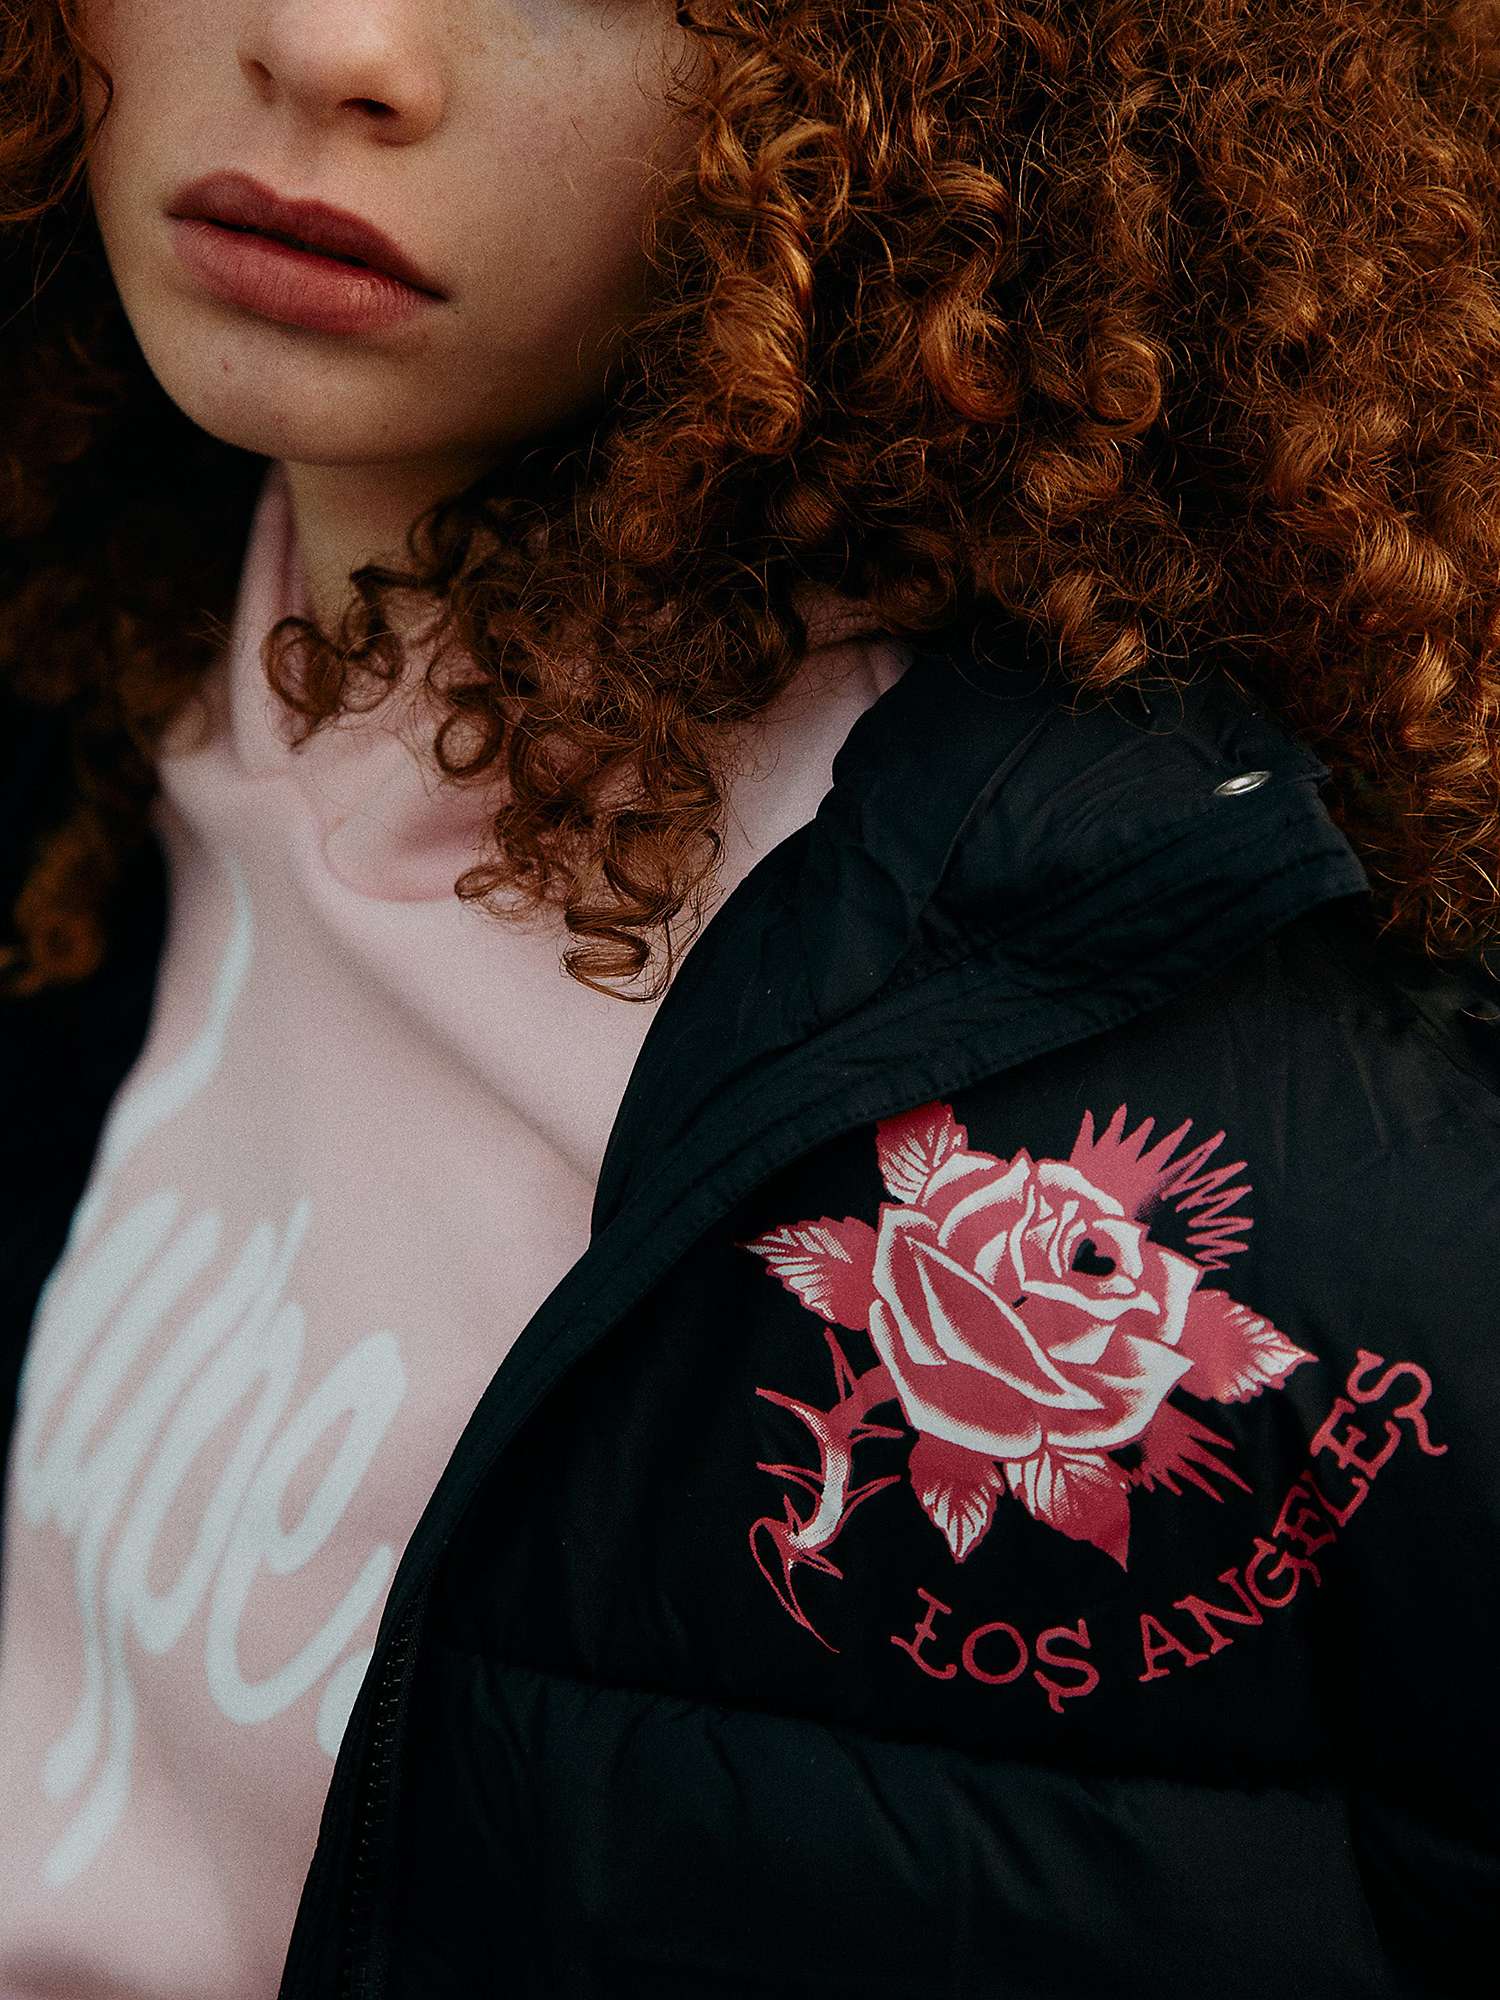 Buy Hype Kids' HYPE. x Ed Hardy Cropped Graphic Puffer Jacket Online at johnlewis.com